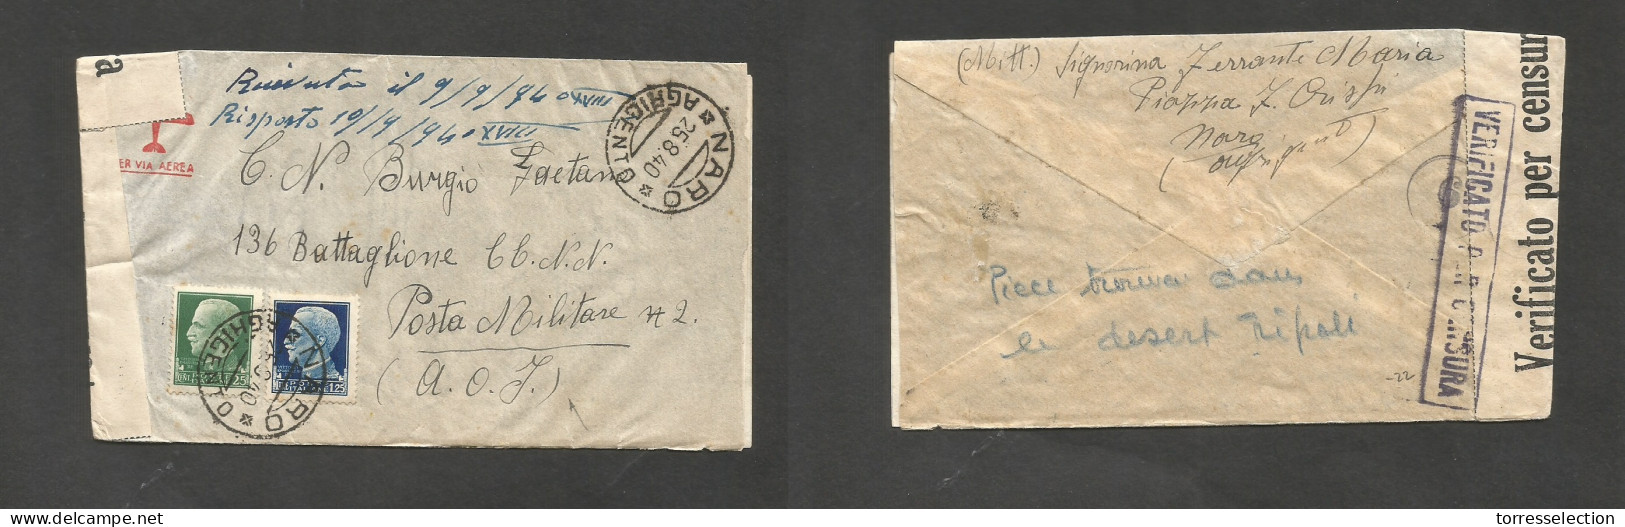 Italy - XX. 1940 (25 Aug) Naro - Africa Oriental Italiana. Air Multifkd Censored Envelope, Censored With Contains. SALE. - Unclassified